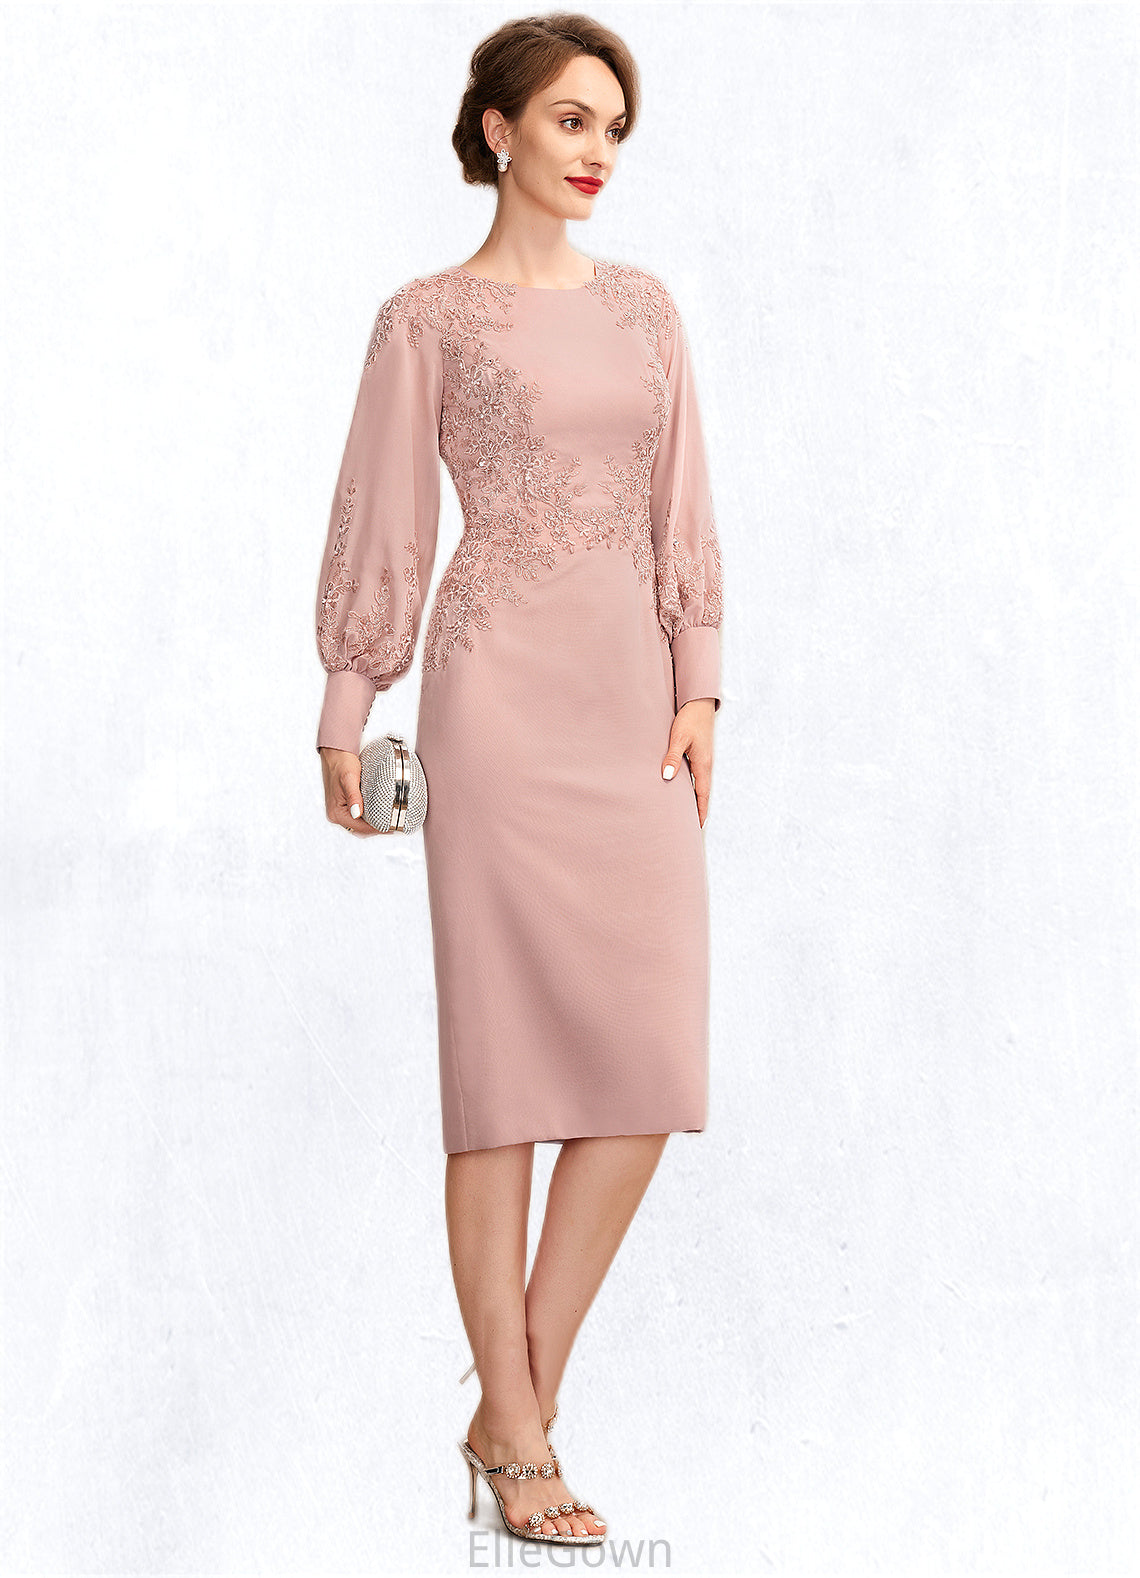 Martina Sheath/Column Scoop Neck Knee-Length Chiffon Lace Mother of the Bride Dress With Beading Sequins DE126P0015020